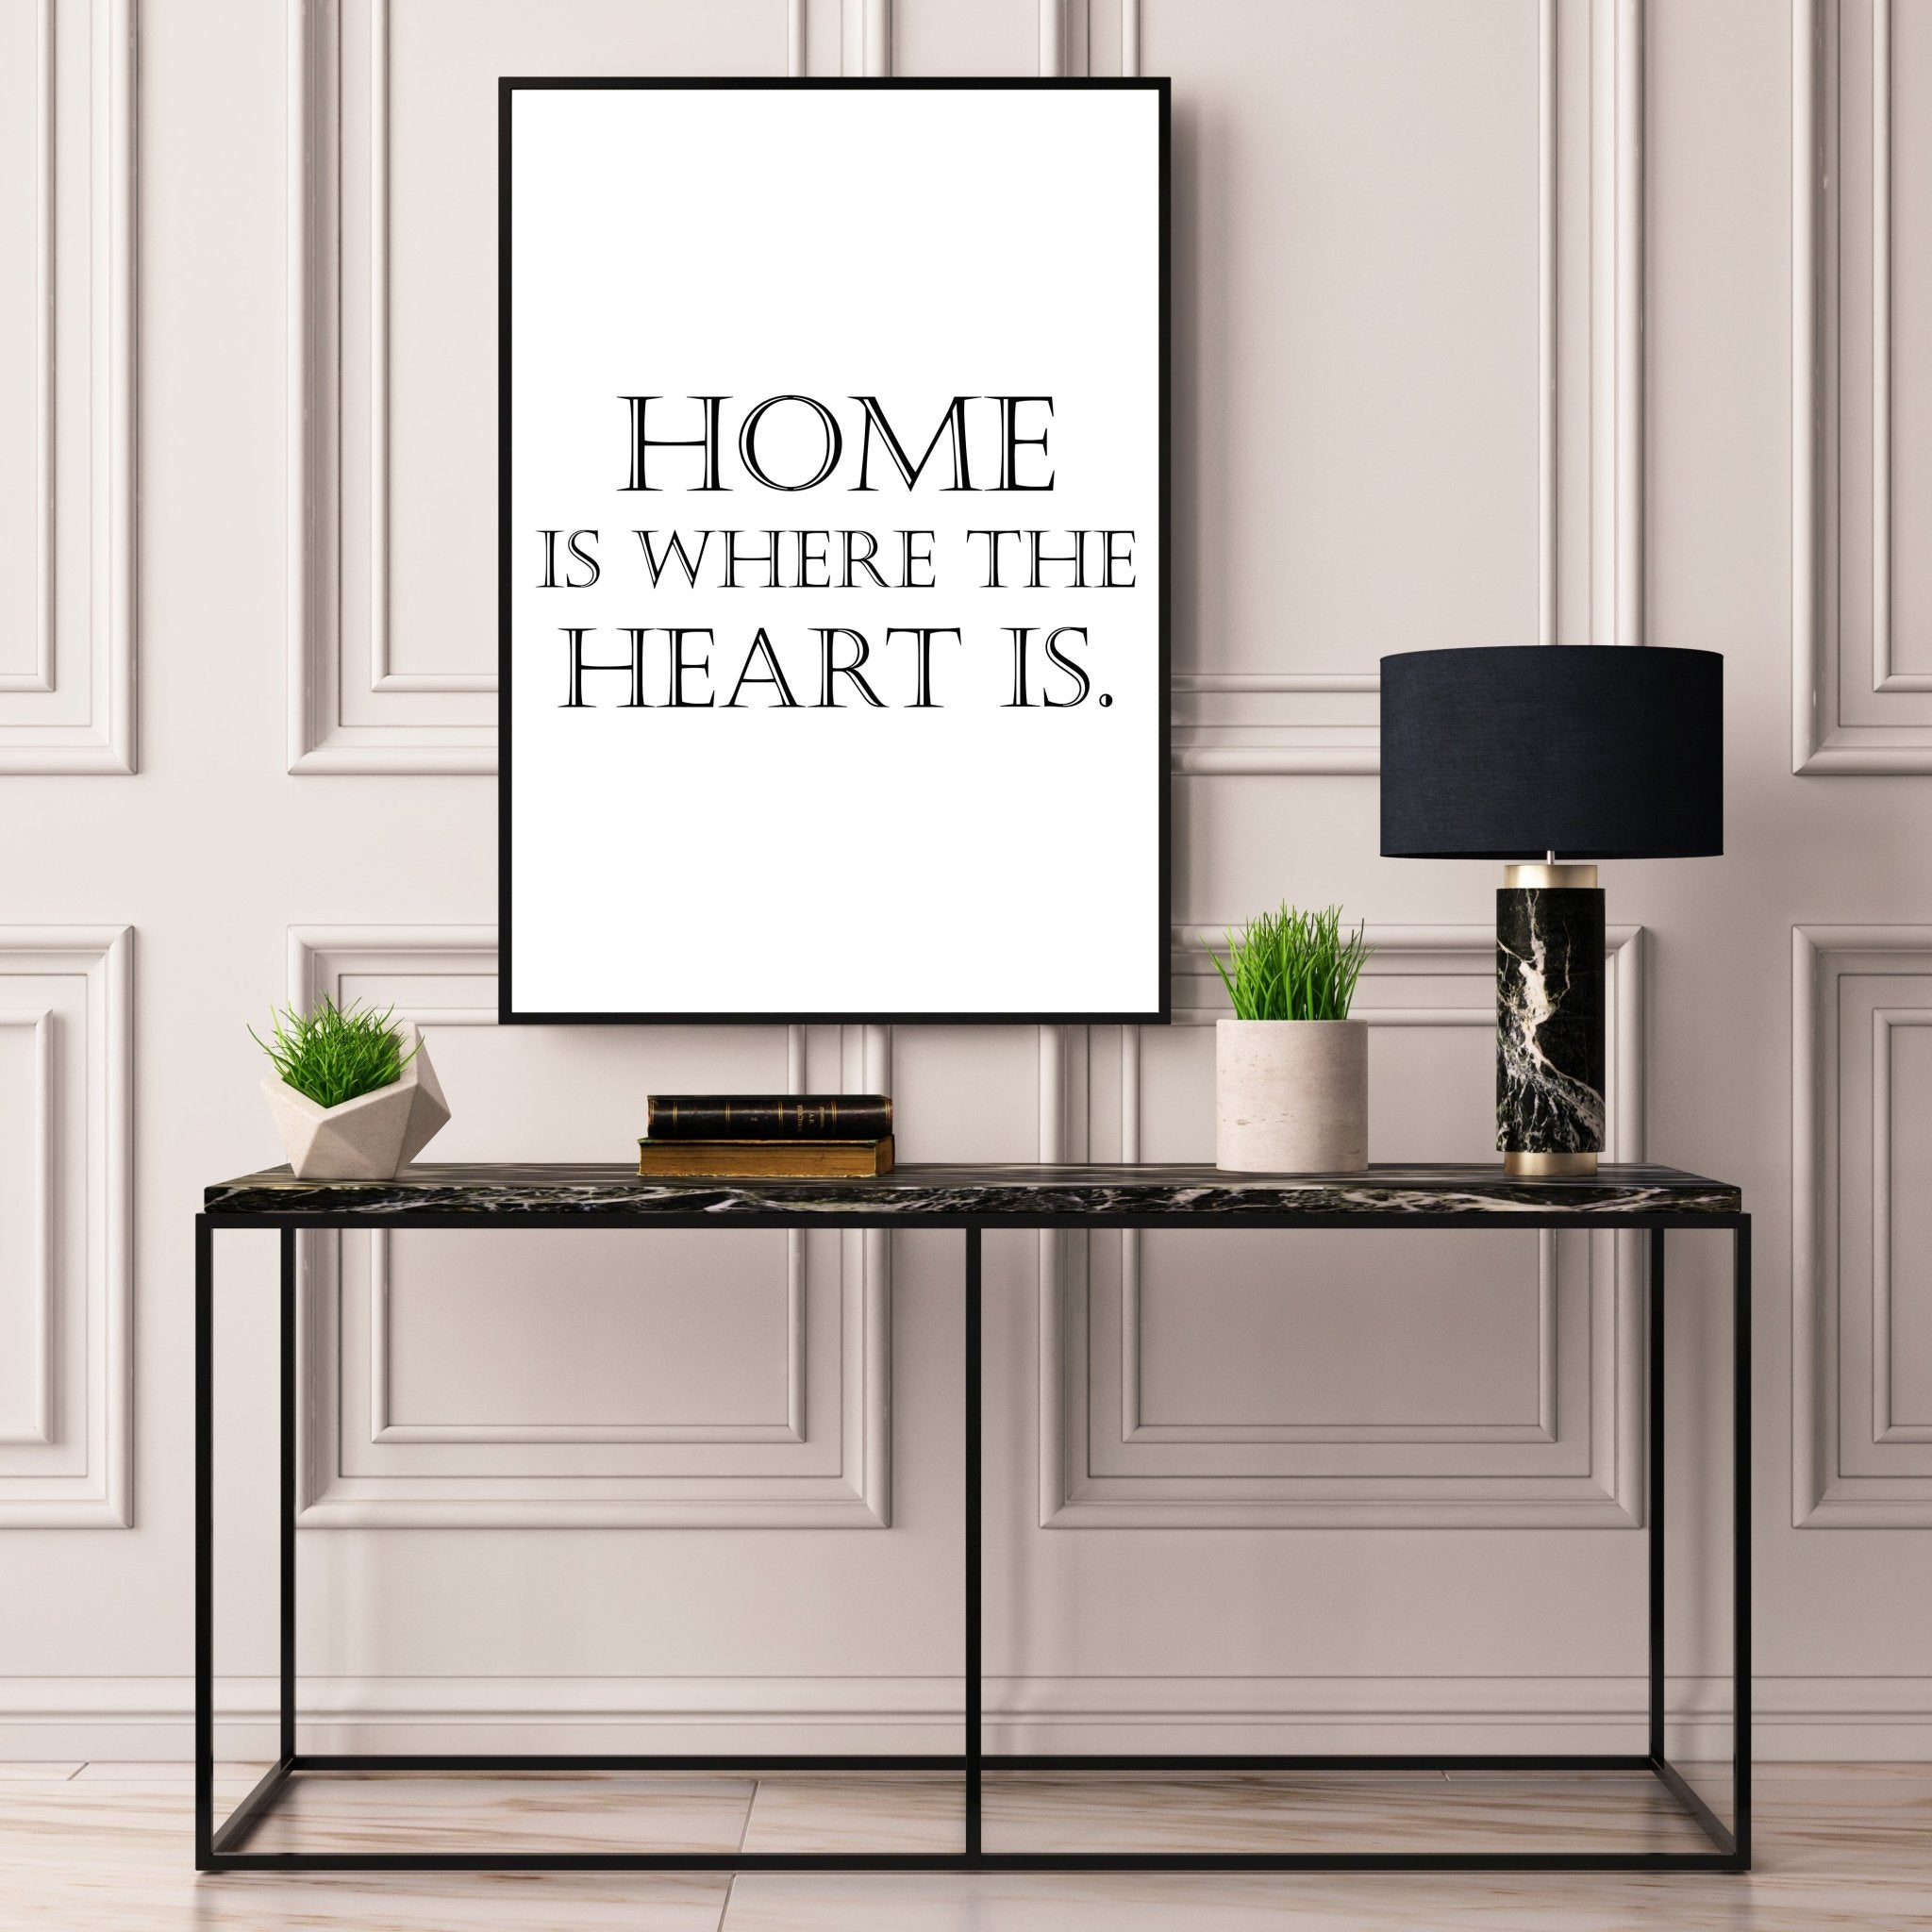 Home Is Where The Heart Is - D'Luxe Prints